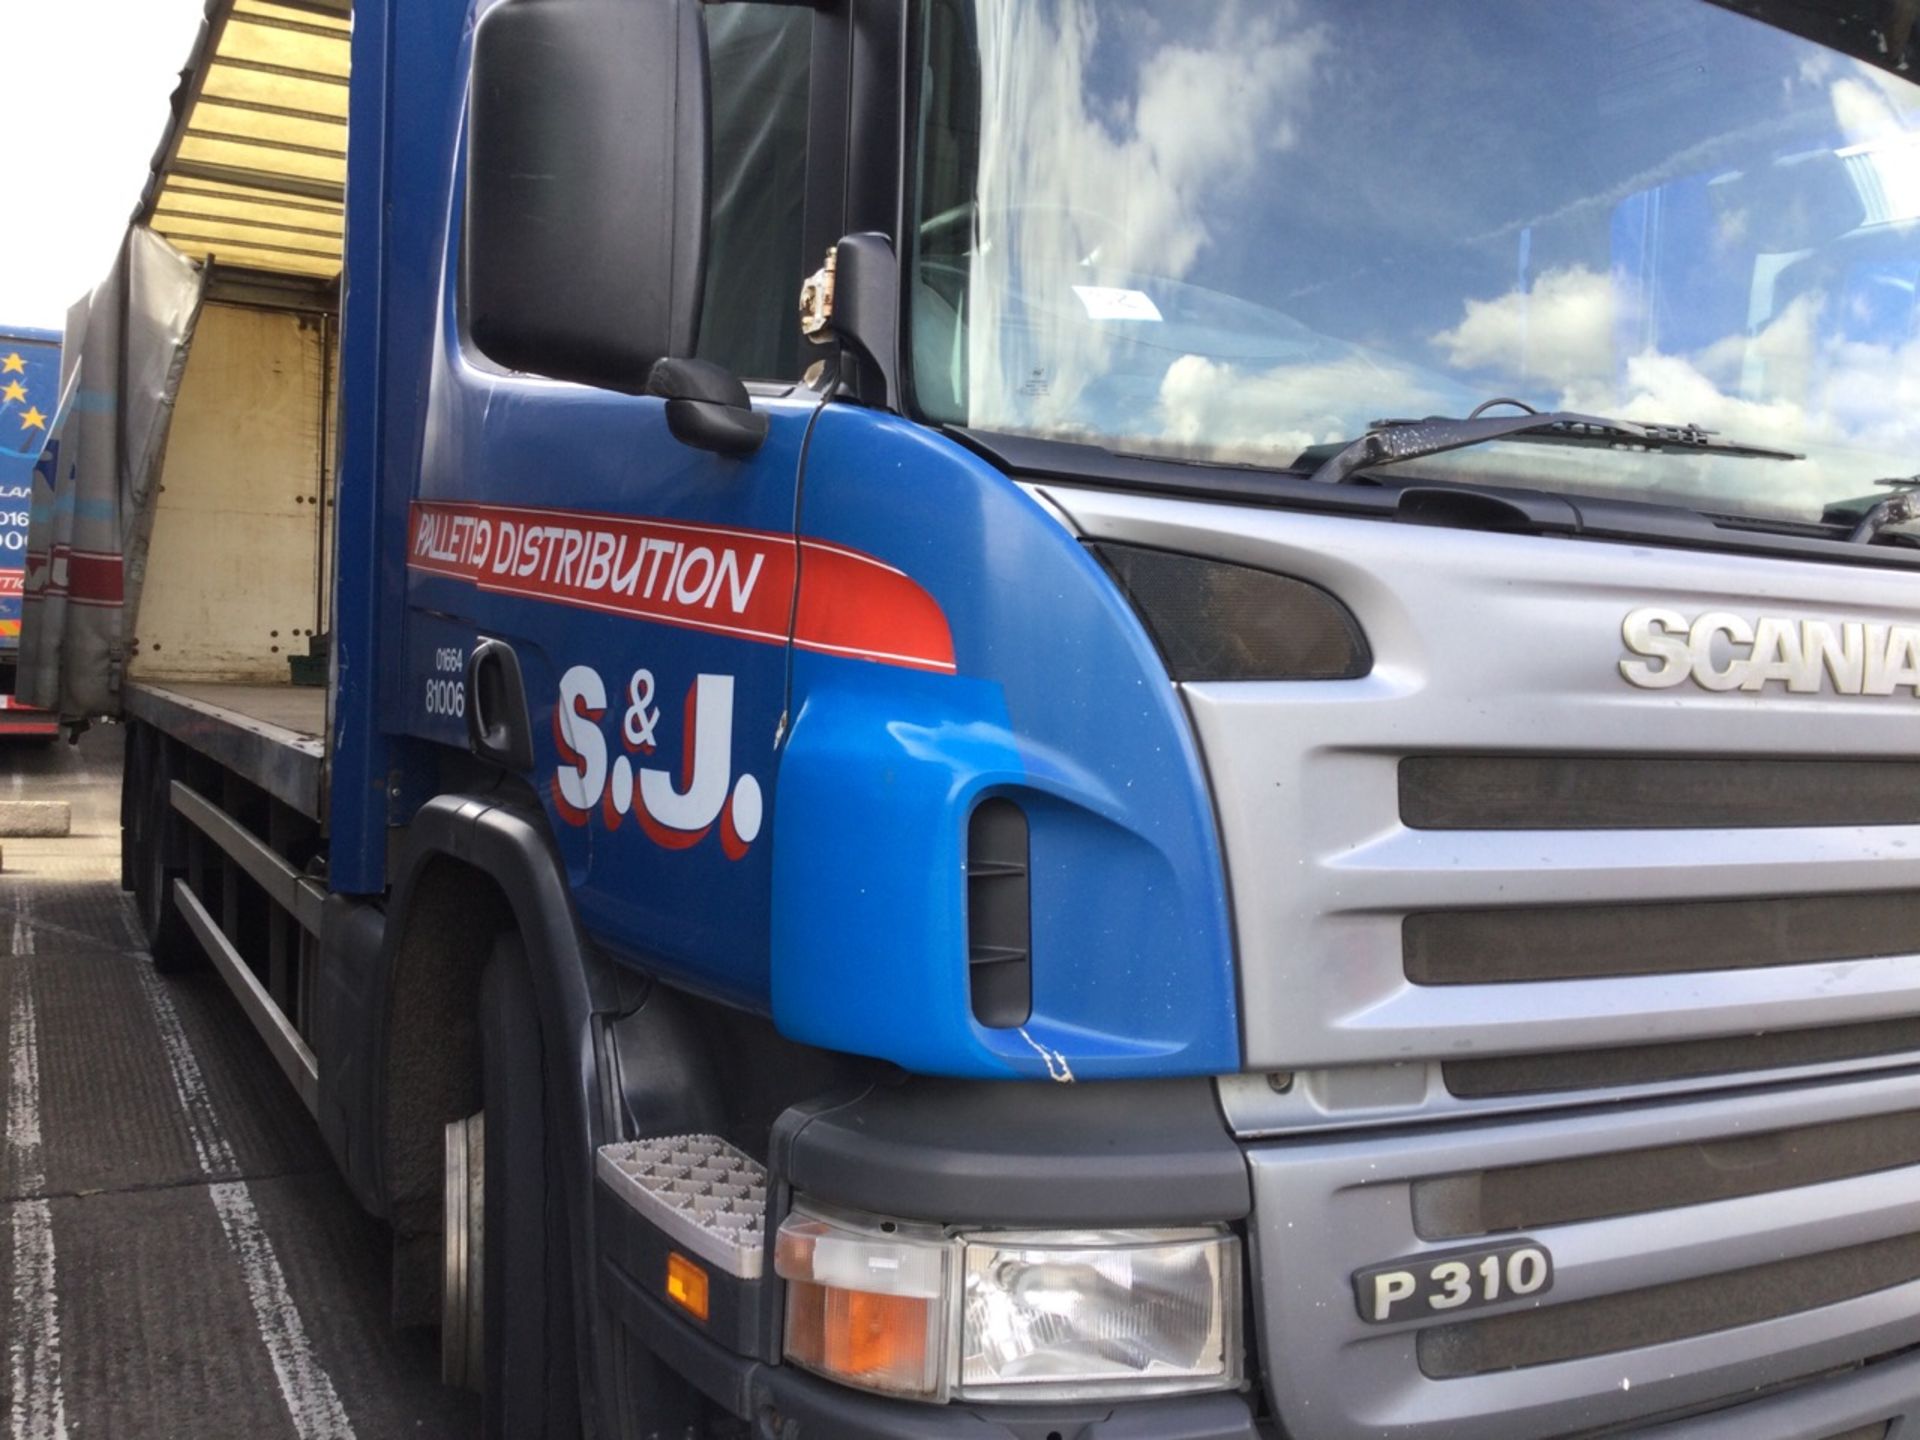 Scania P310-SRS D-CLASS 6x2 Curtainsider With Tail Lift 887401kms Mot No Details, Registration numb